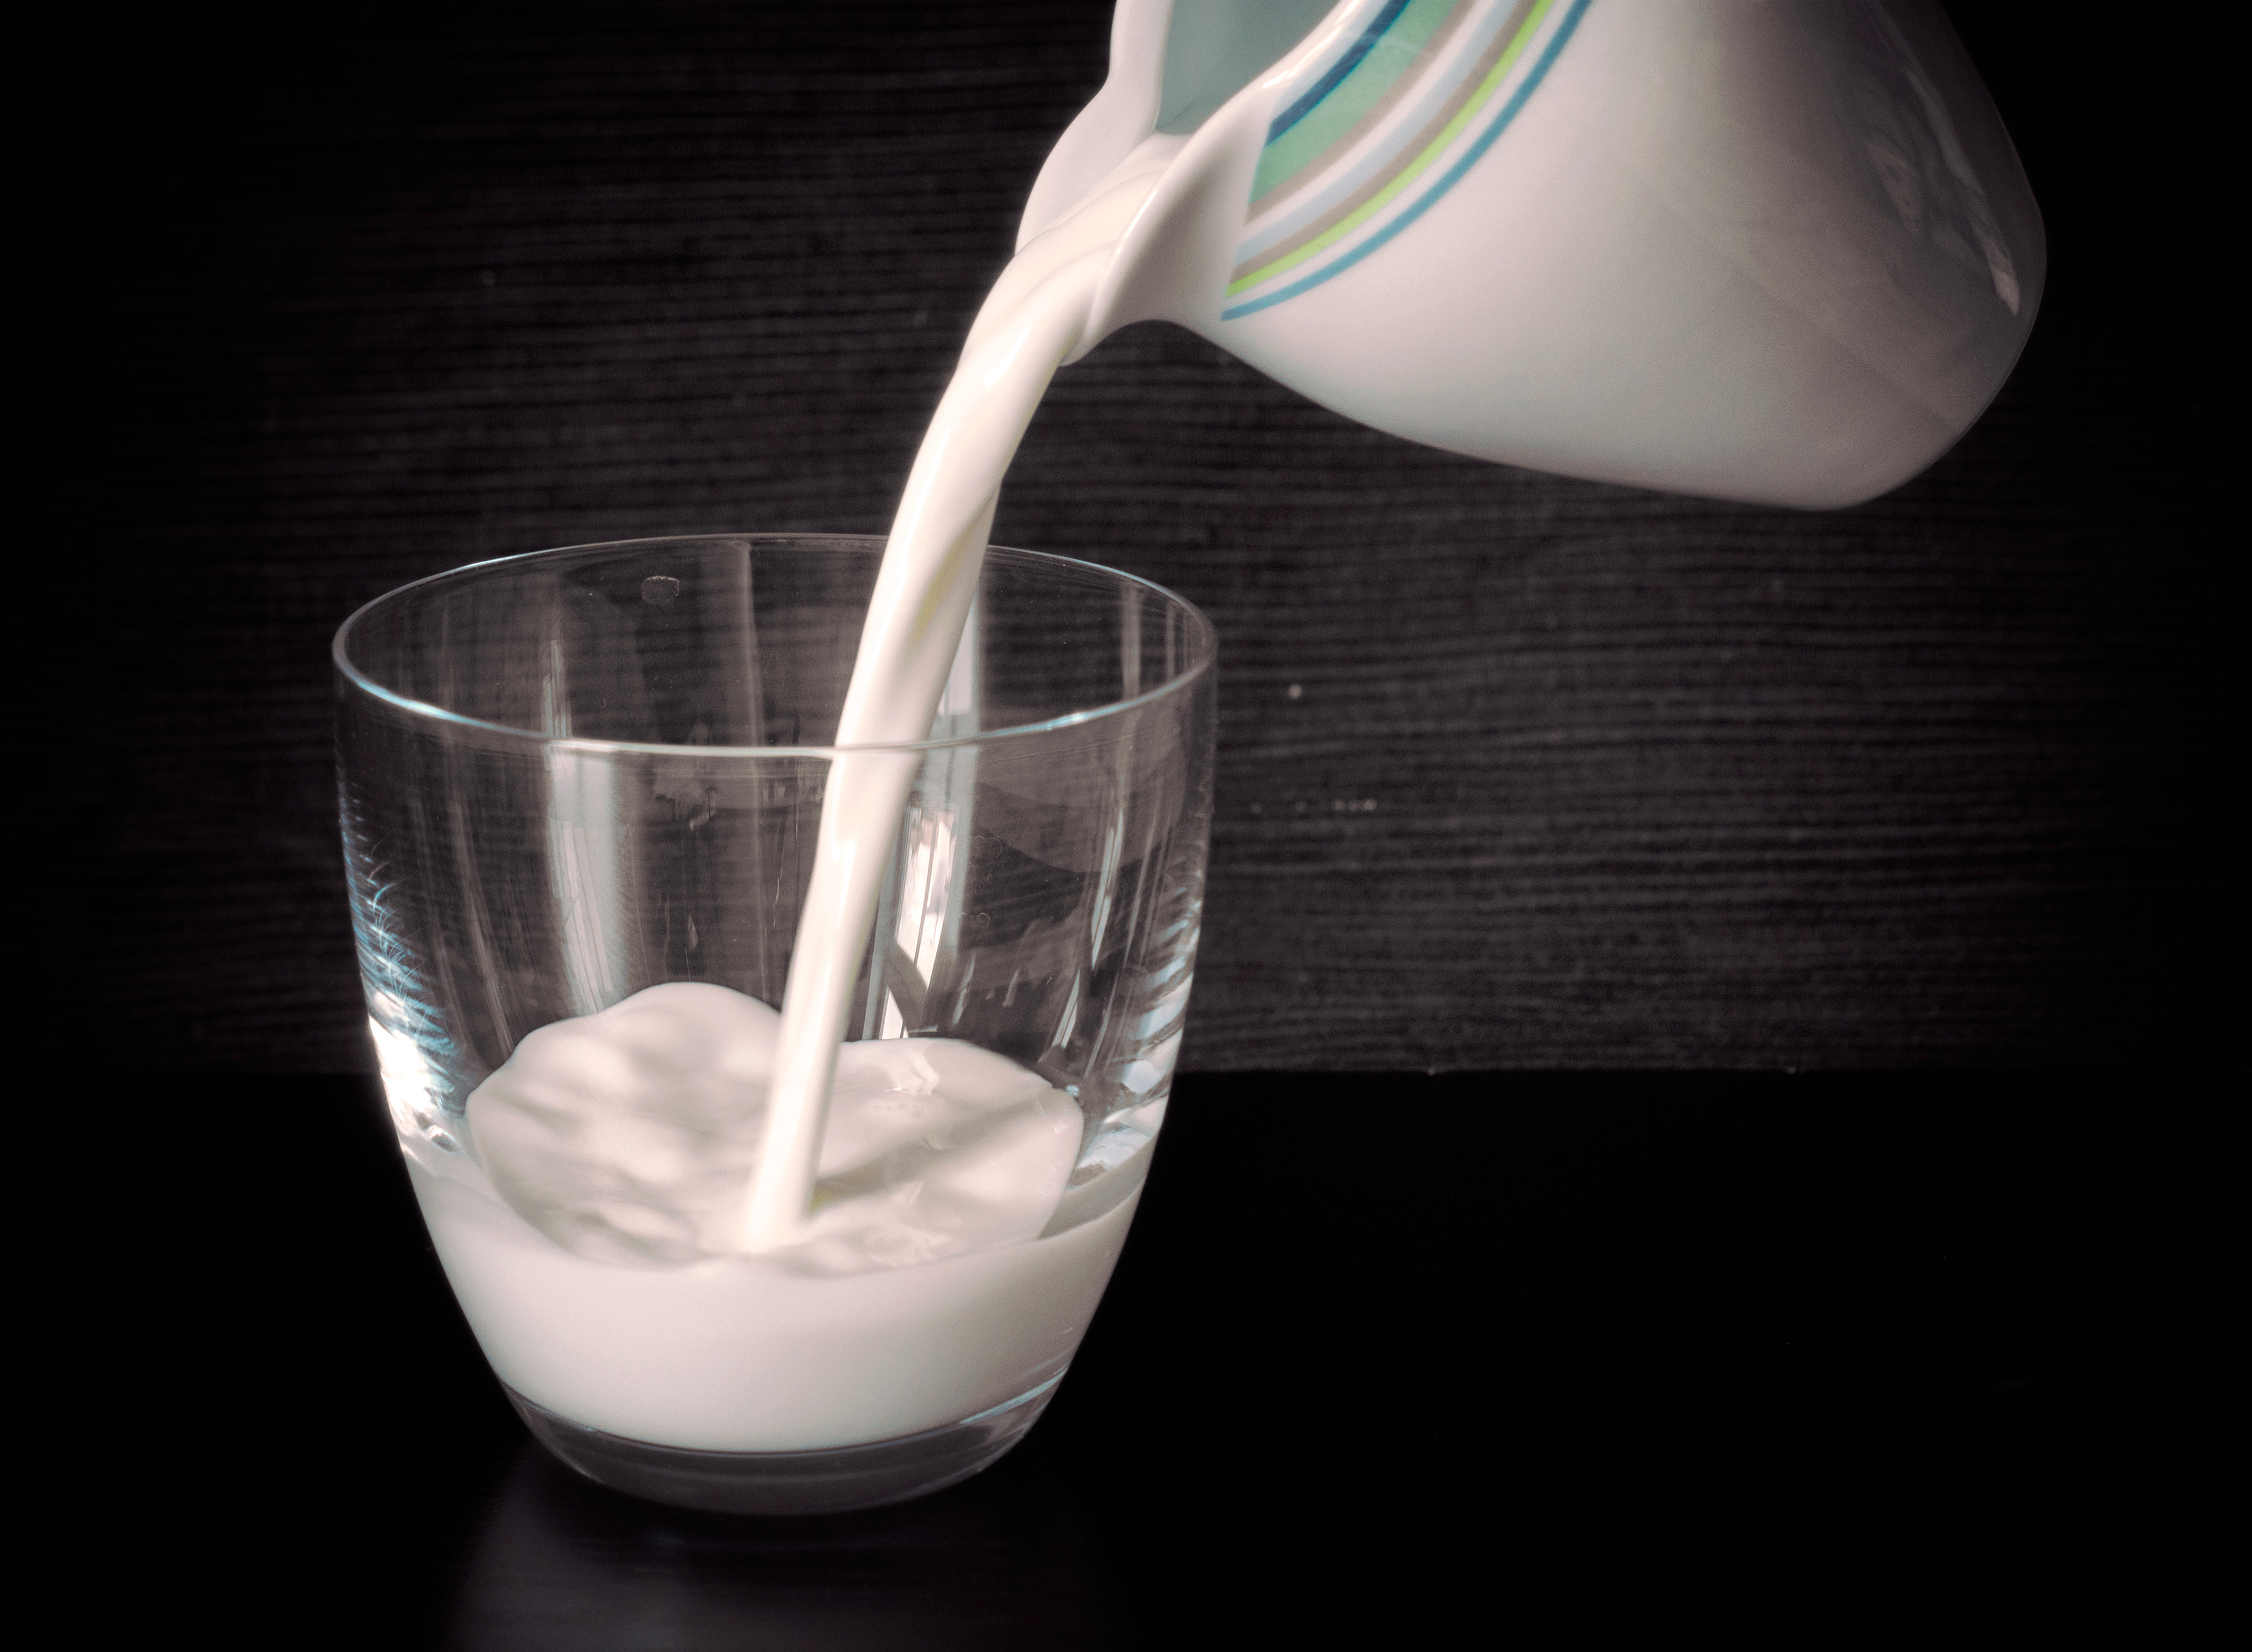 Milk is poured into a glass | Free Stock Photo | LibreShot